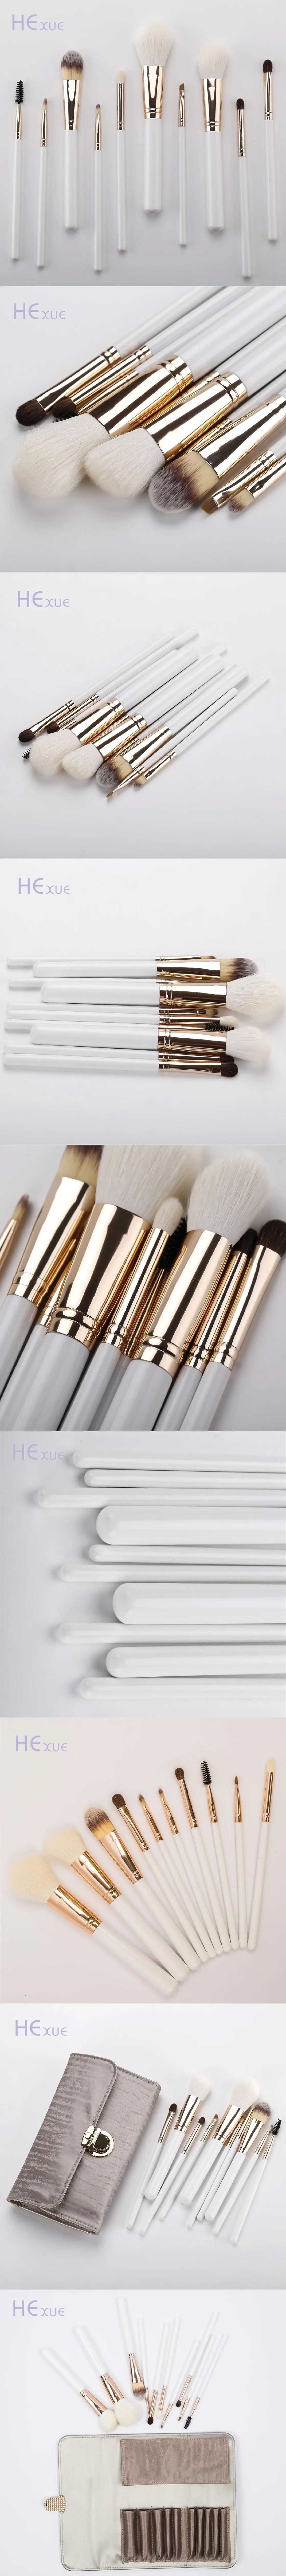 Hot selling Personalized Brush